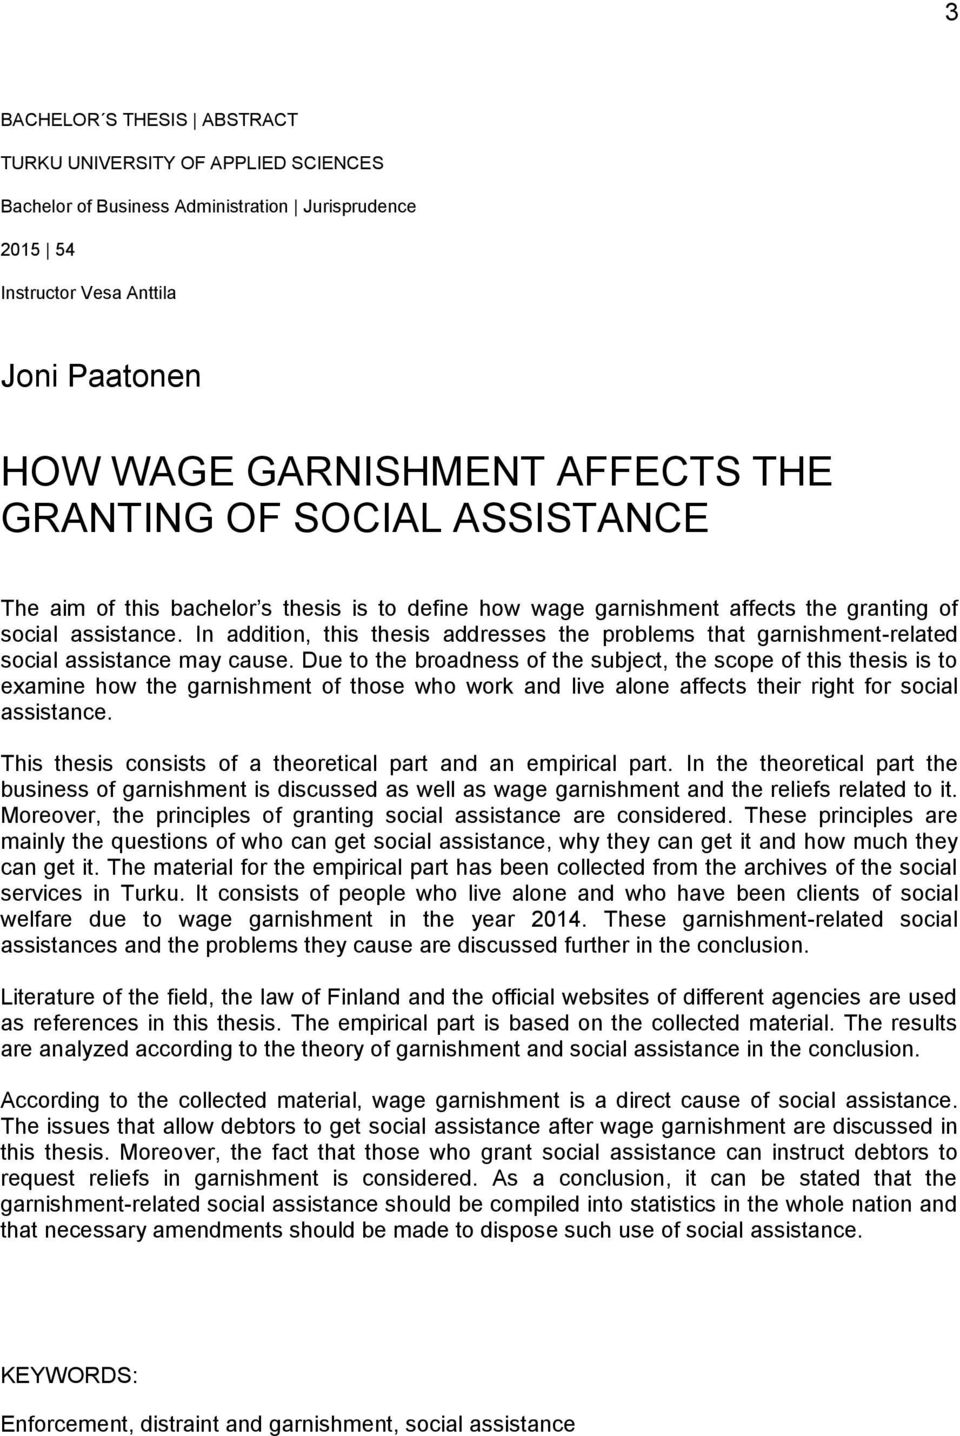 In addition, this thesis addresses the problems that garnishment-related social assistance may cause.